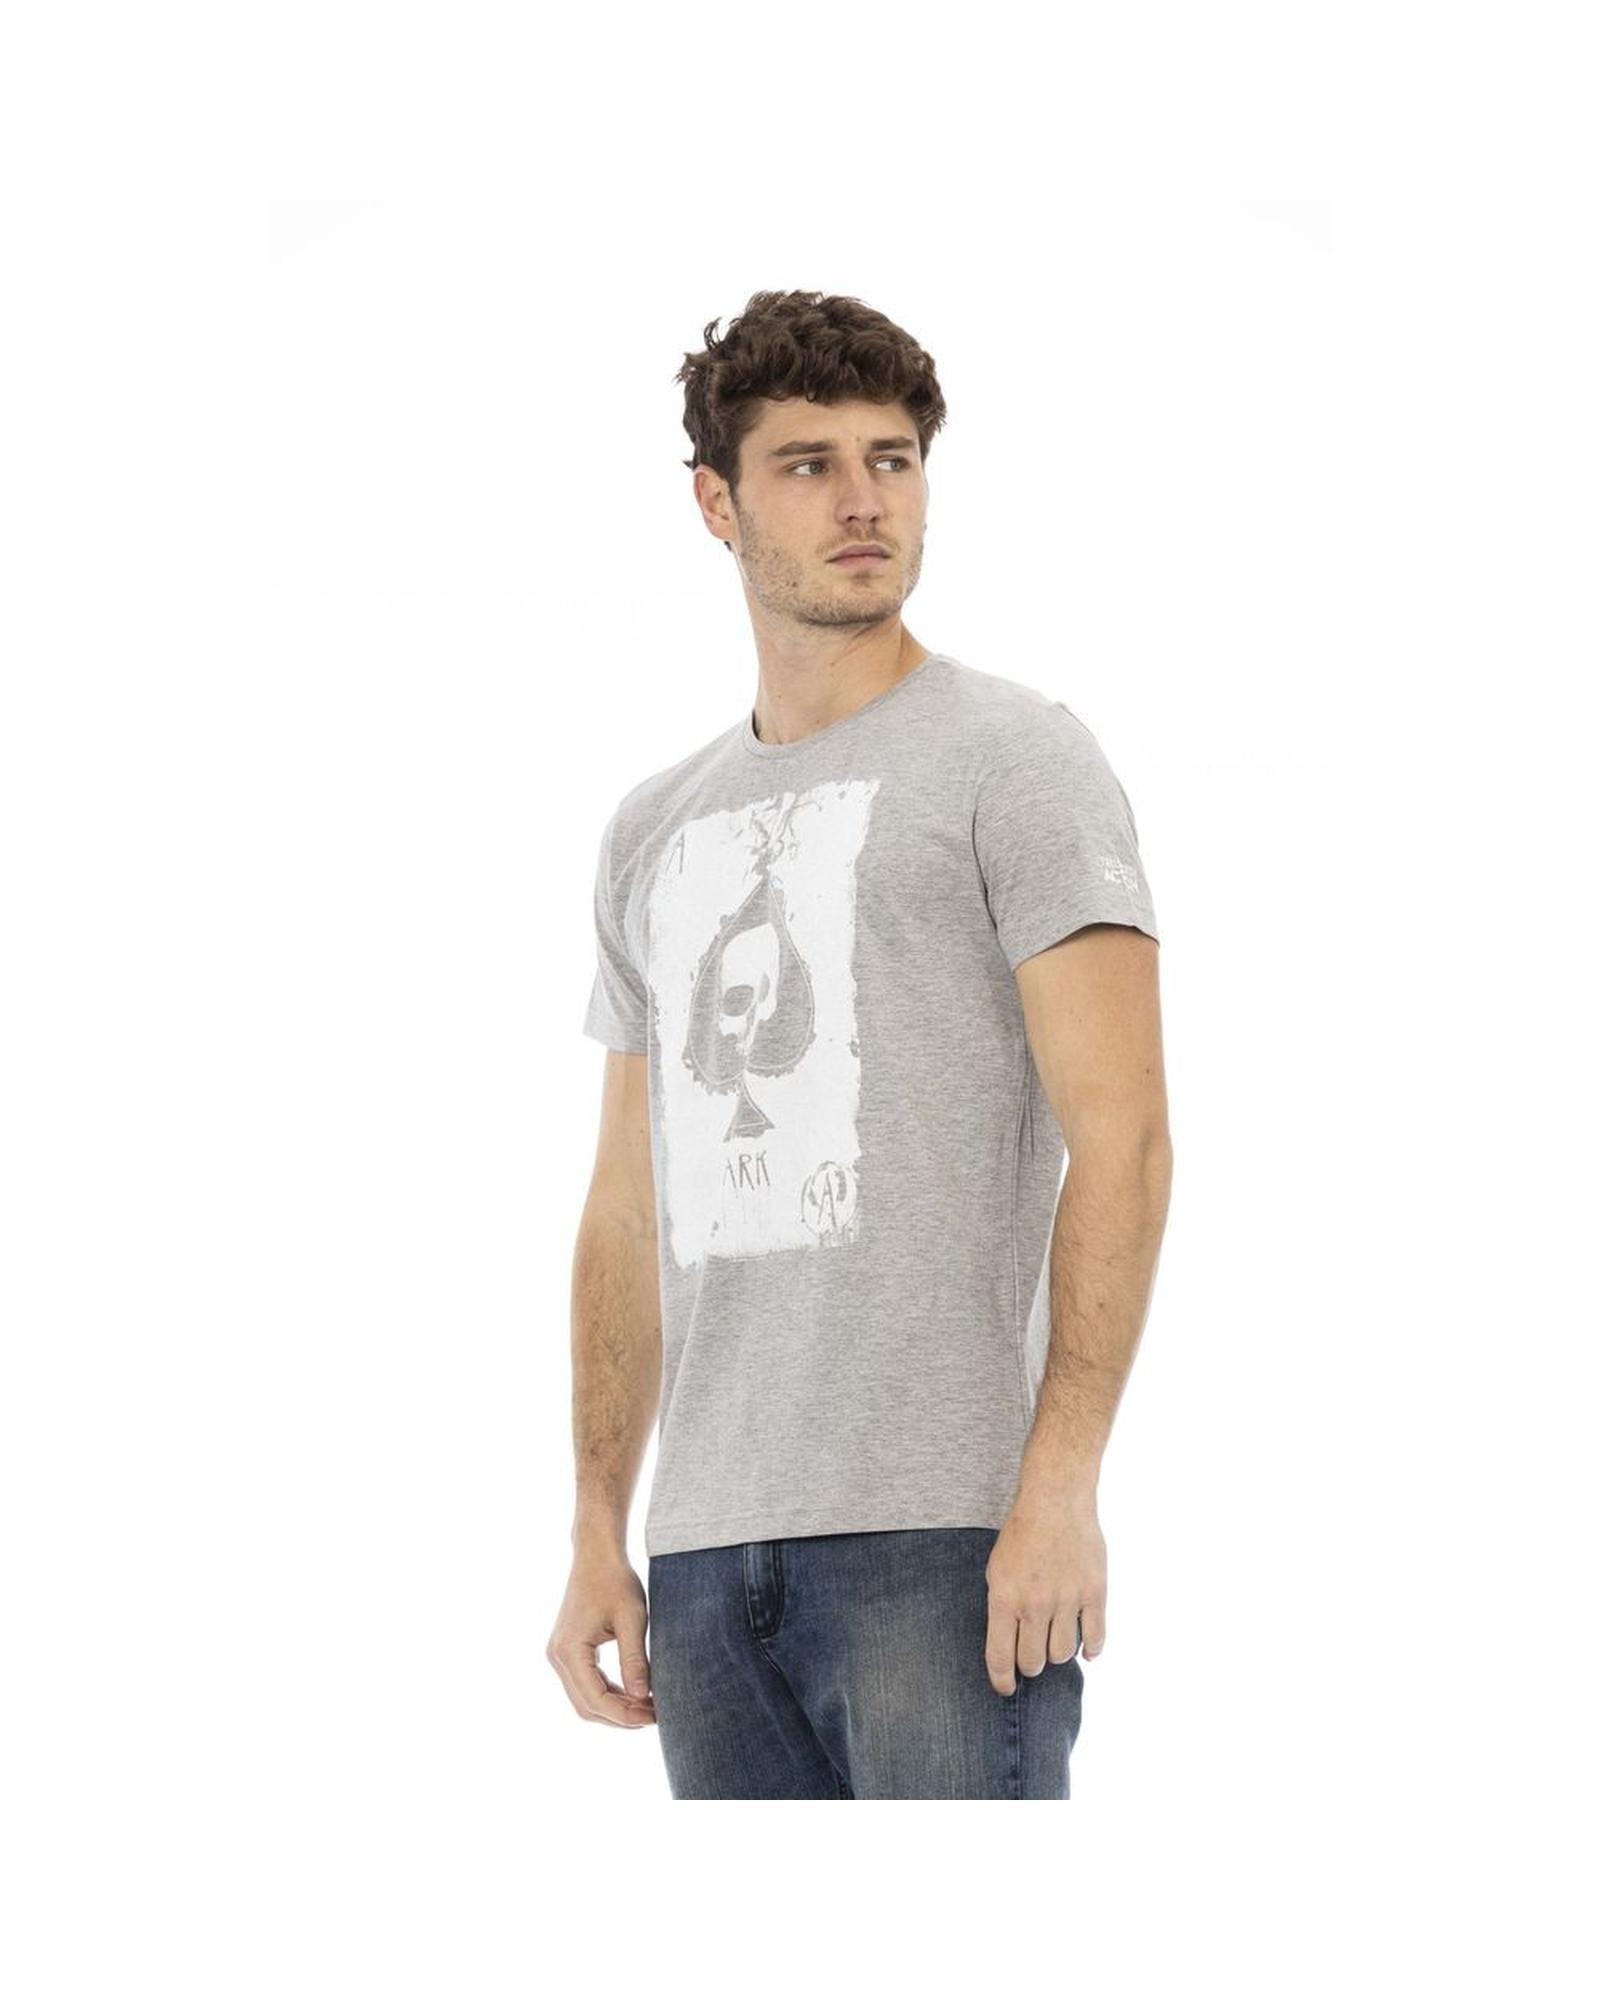 Men's Elevate Casual Chic with Sleek Gray Tee - L